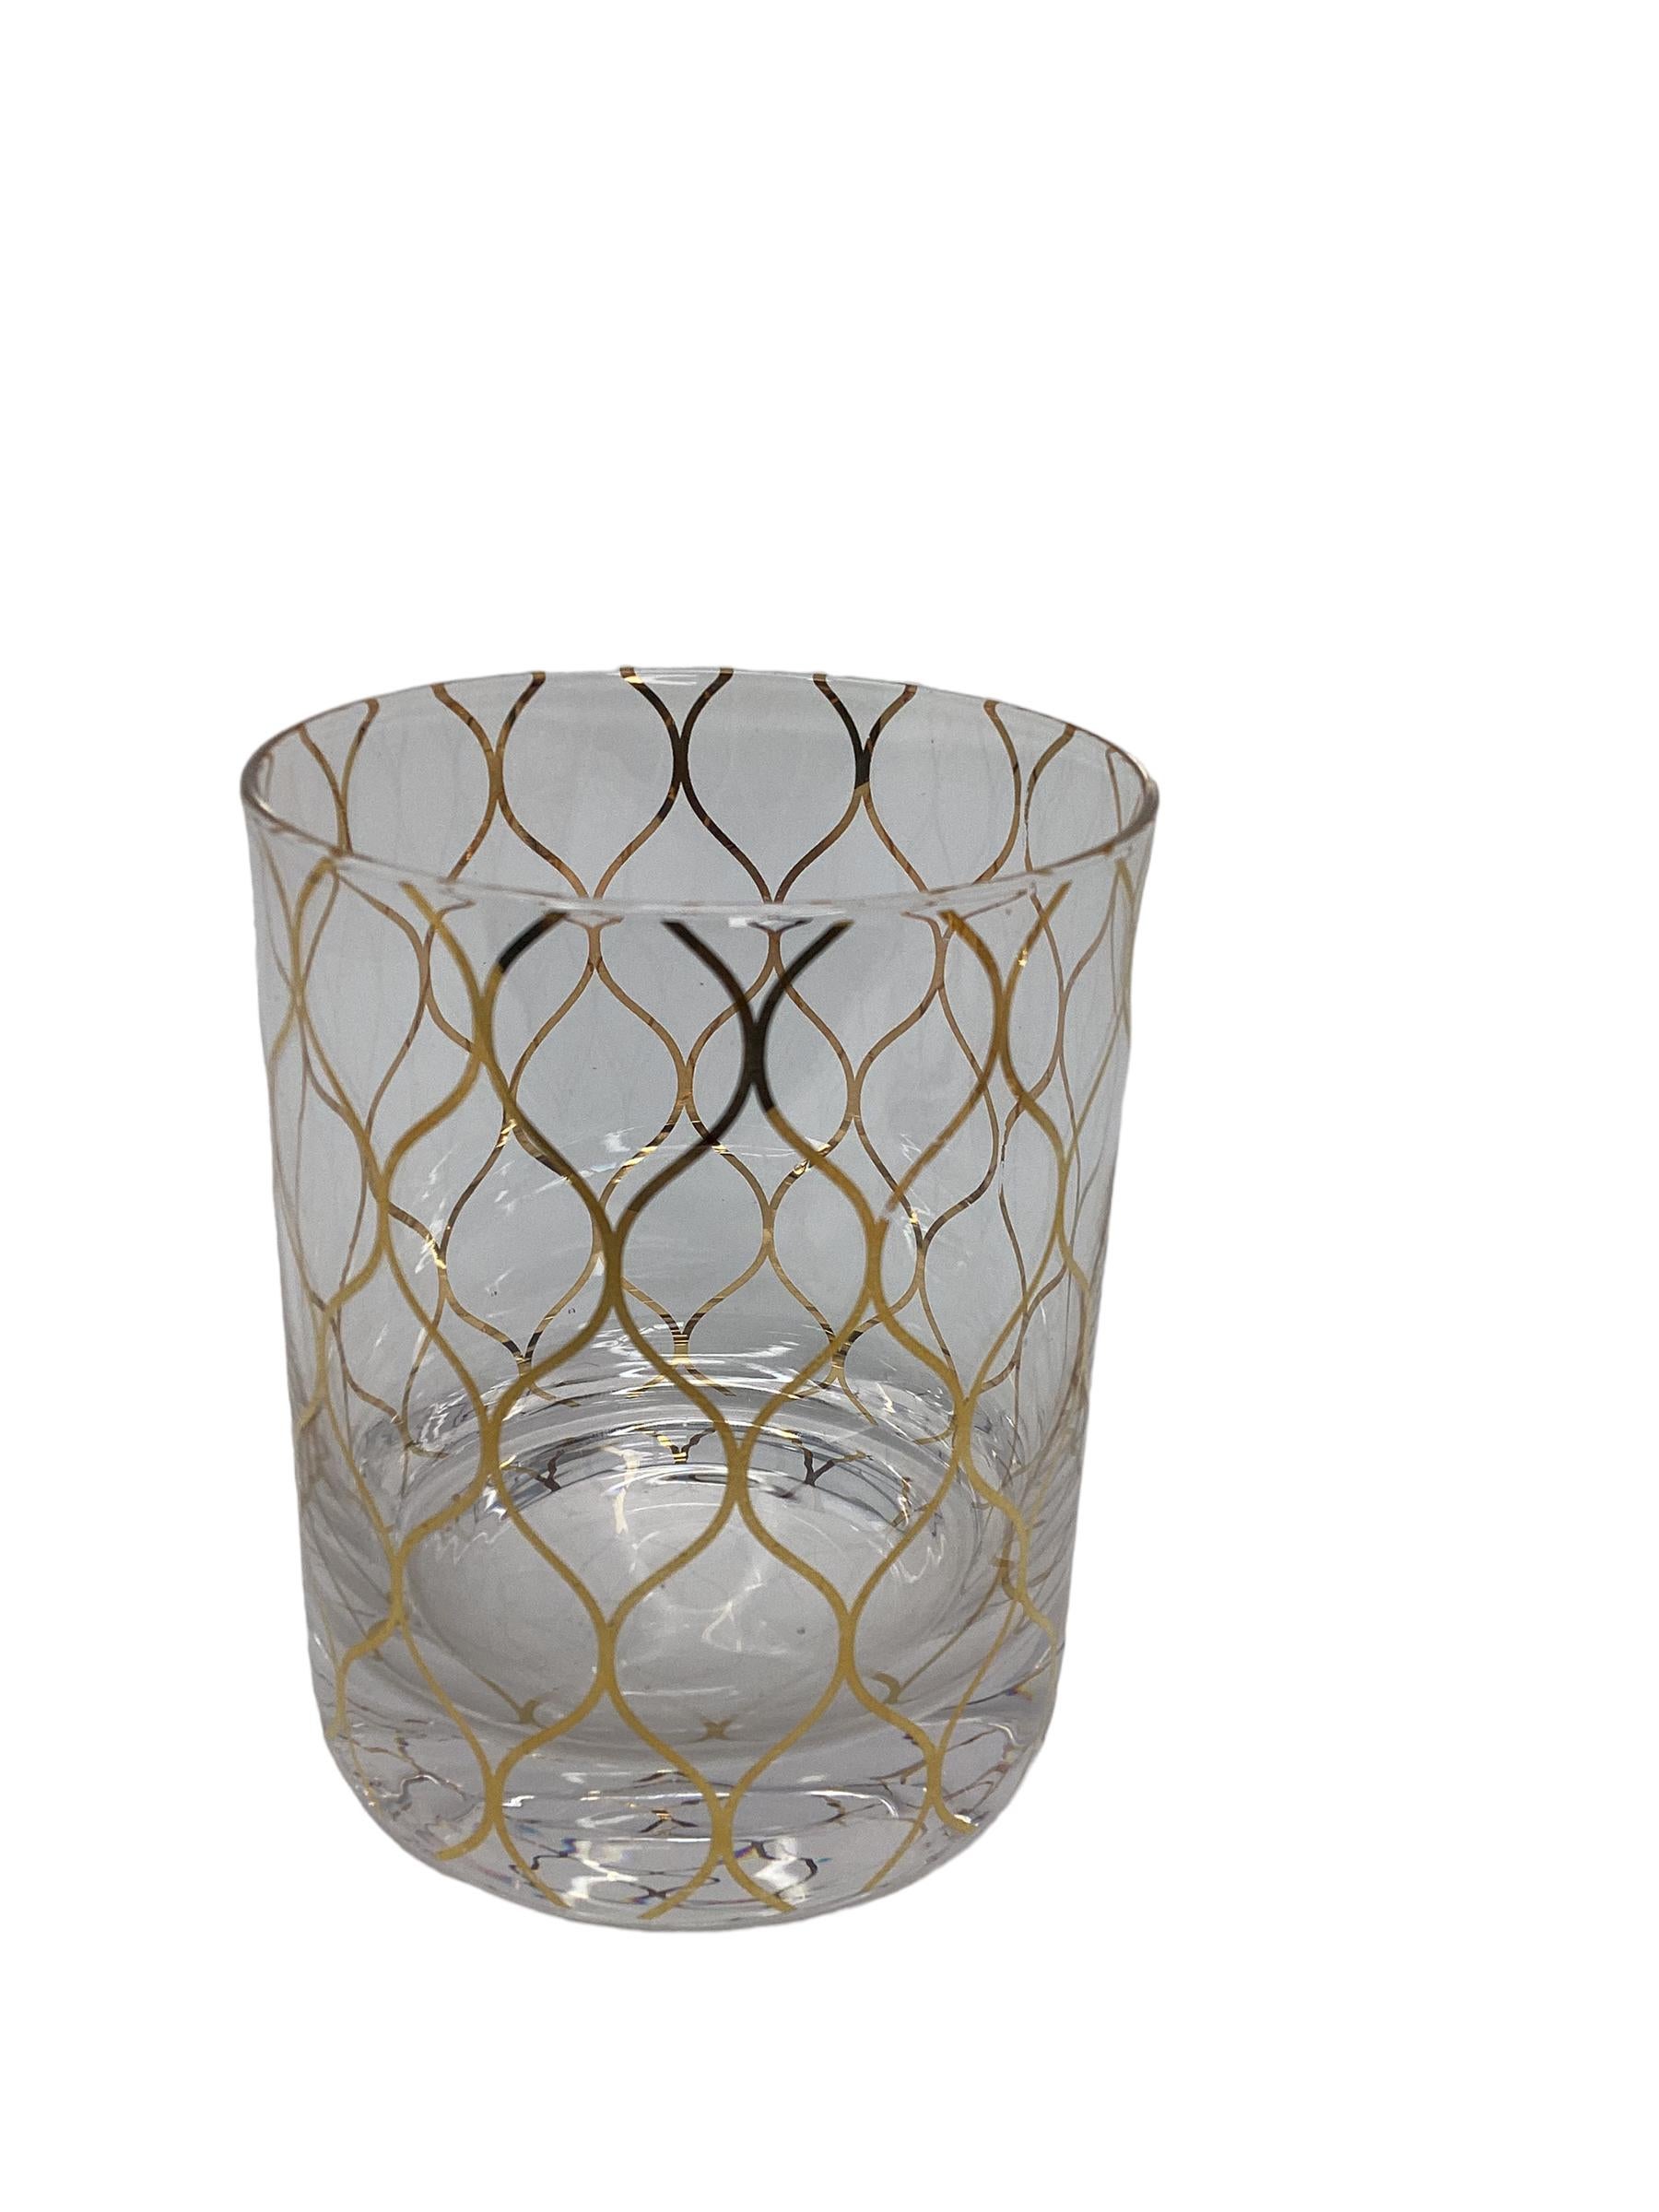 Set of Four Rocks Glasses with Geometric Shapes  For Sale 1